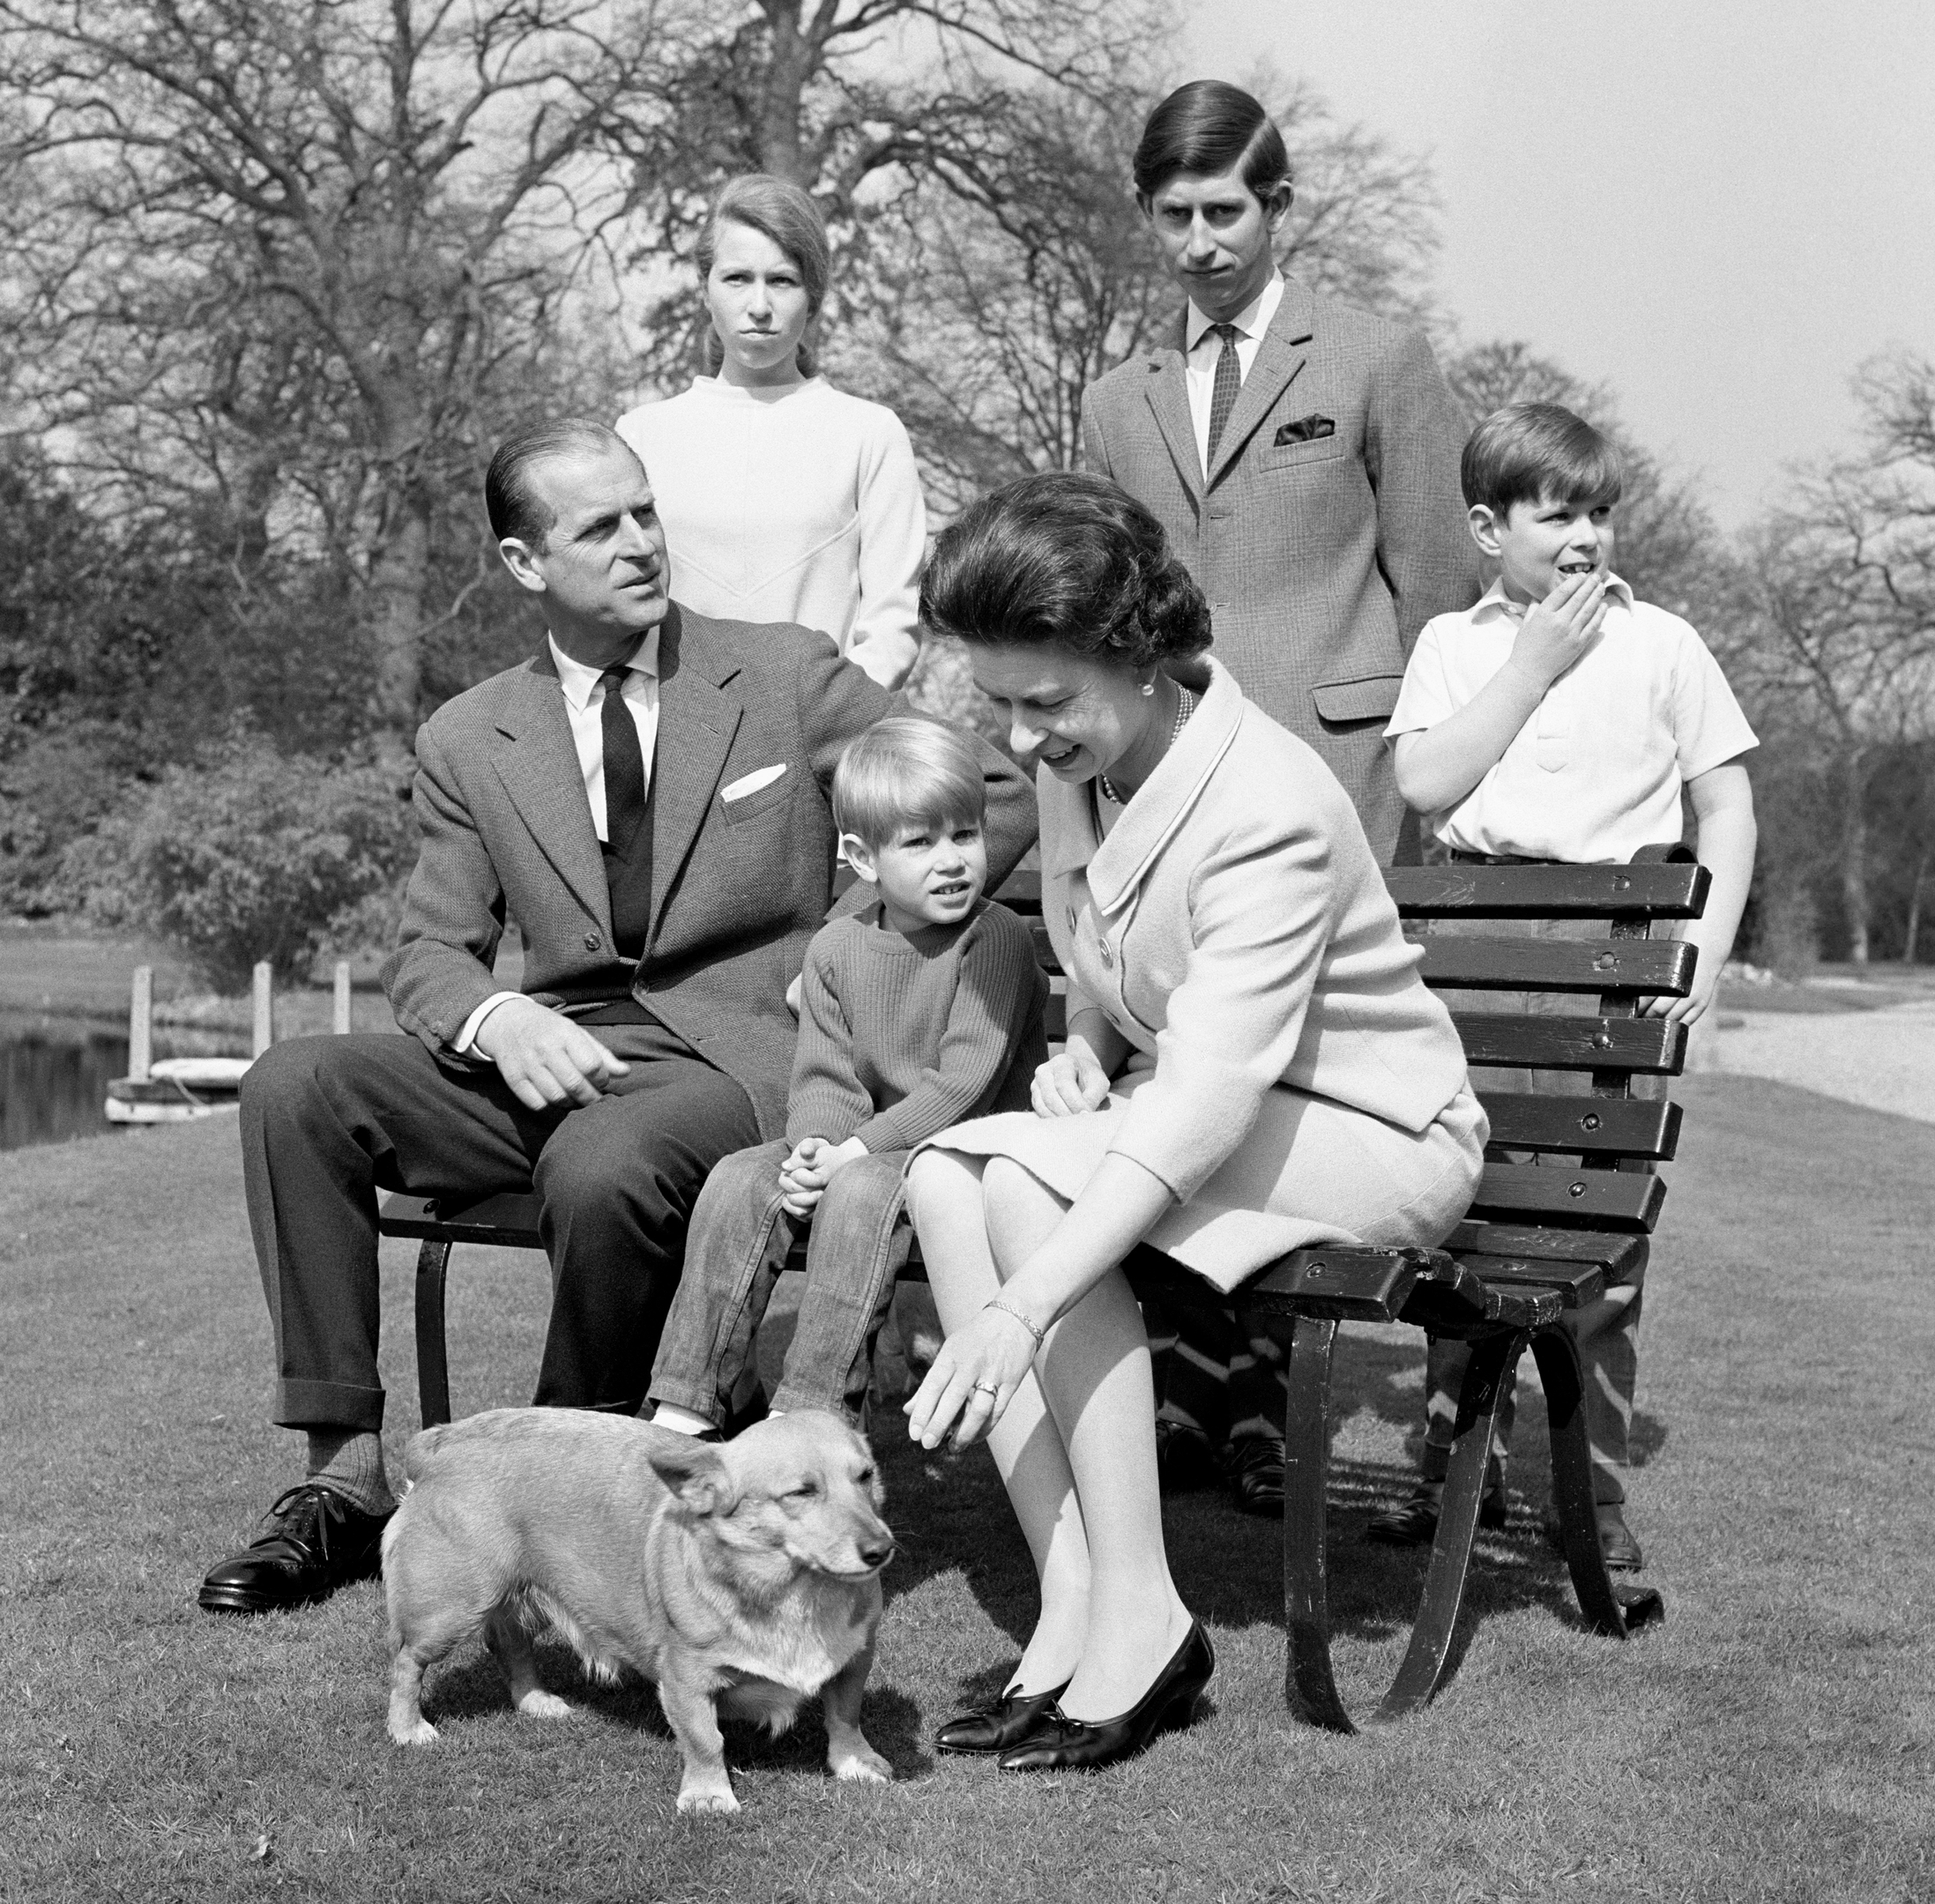 This time it is four-year-old Prince Edward and the pet Corgi who seem to be attracting the attention of Queen Elizabeth II, 42. The Royal Family were posing in the gardens at Frogmore, Windsor, for special birthday photographs. 